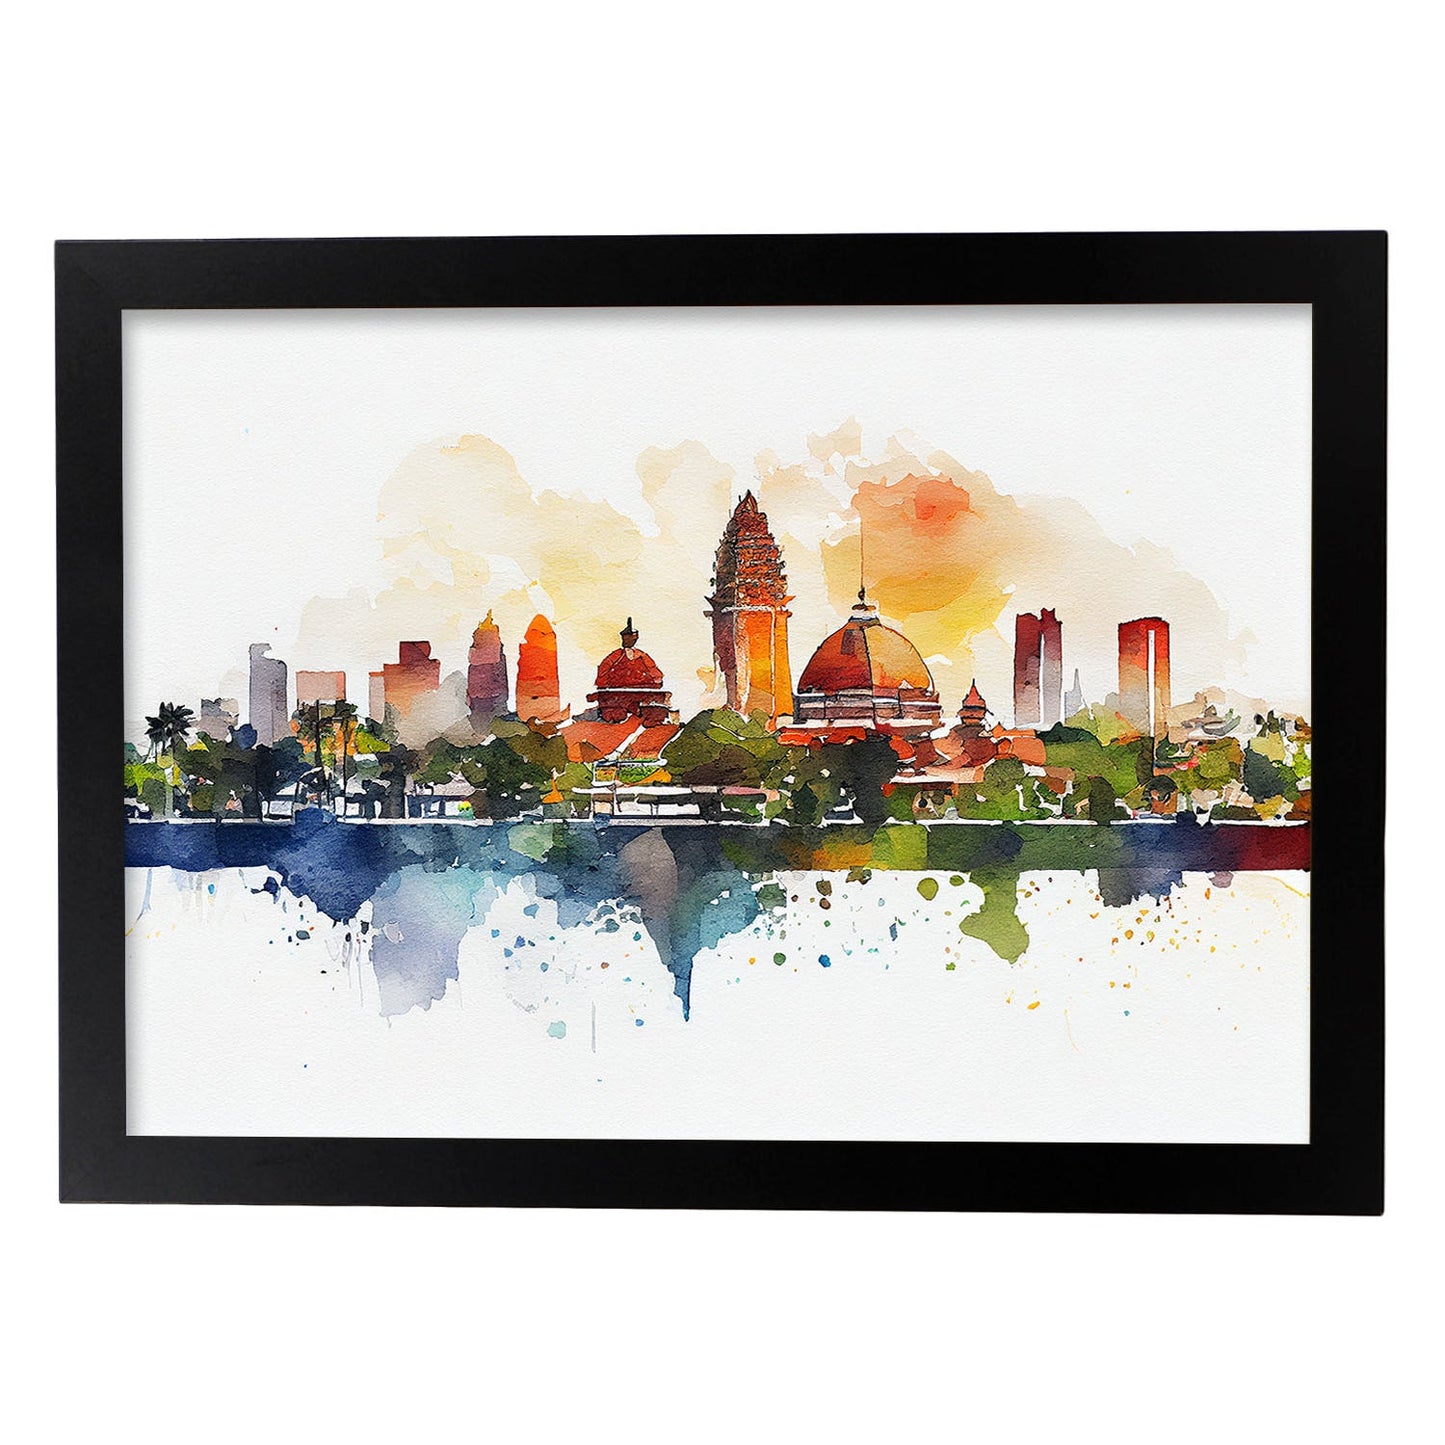 Nacnic watercolor of a skyline of the city of Bali_2. Aesthetic Wall Art Prints for Bedroom or Living Room Design.